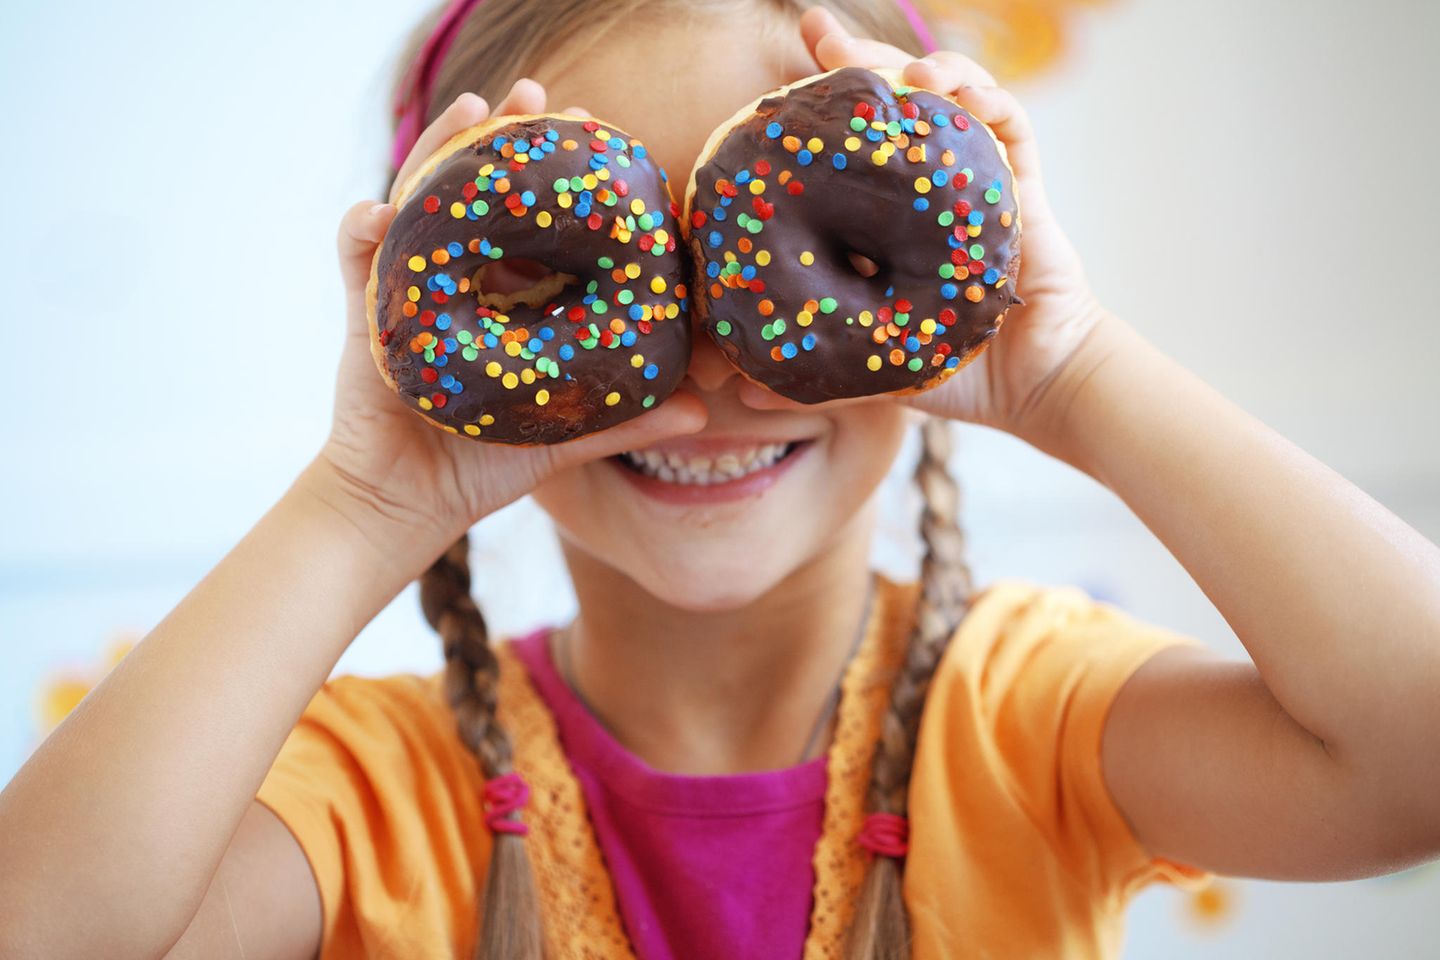 Children's food: child with donuts "loading =" lazy